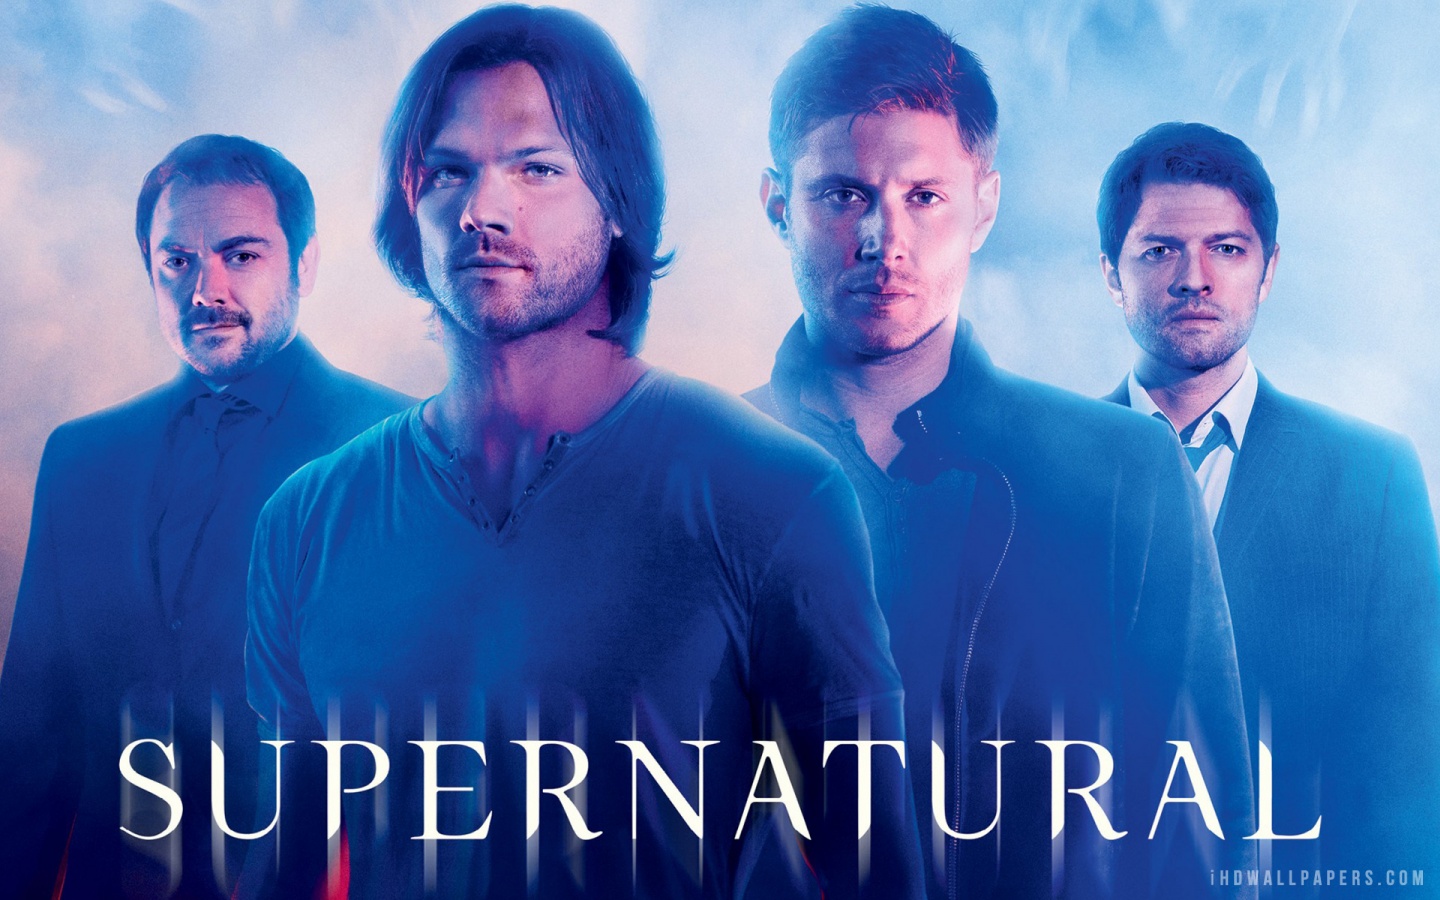 47+] Supernatural Wallpapers 2014 on